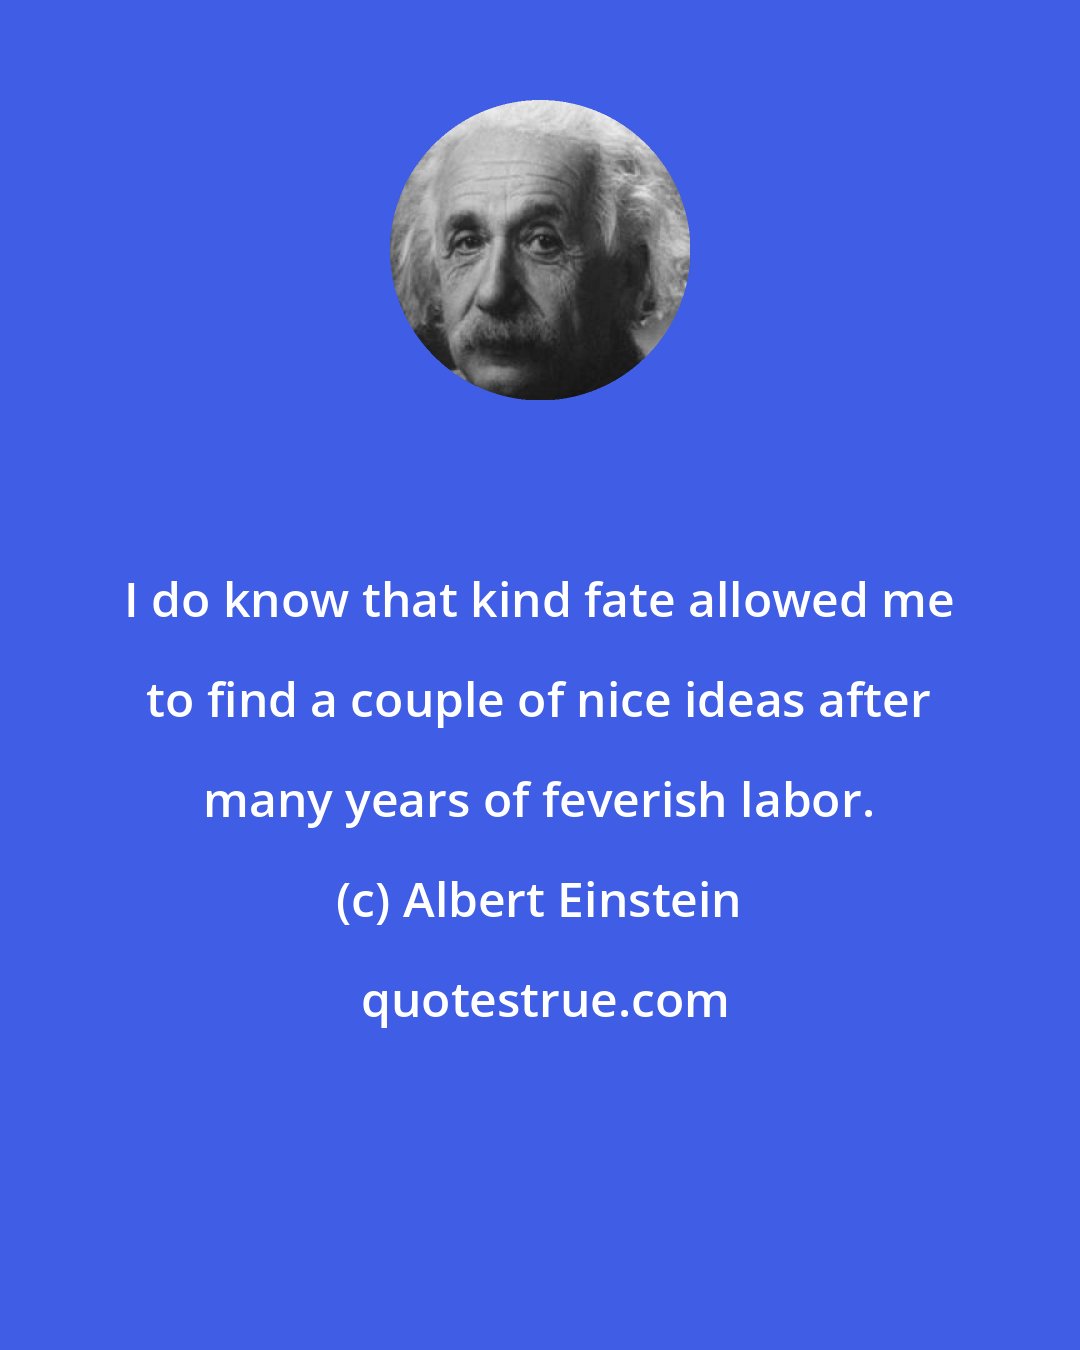 Albert Einstein: I do know that kind fate allowed me to find a couple of nice ideas after many years of feverish labor.